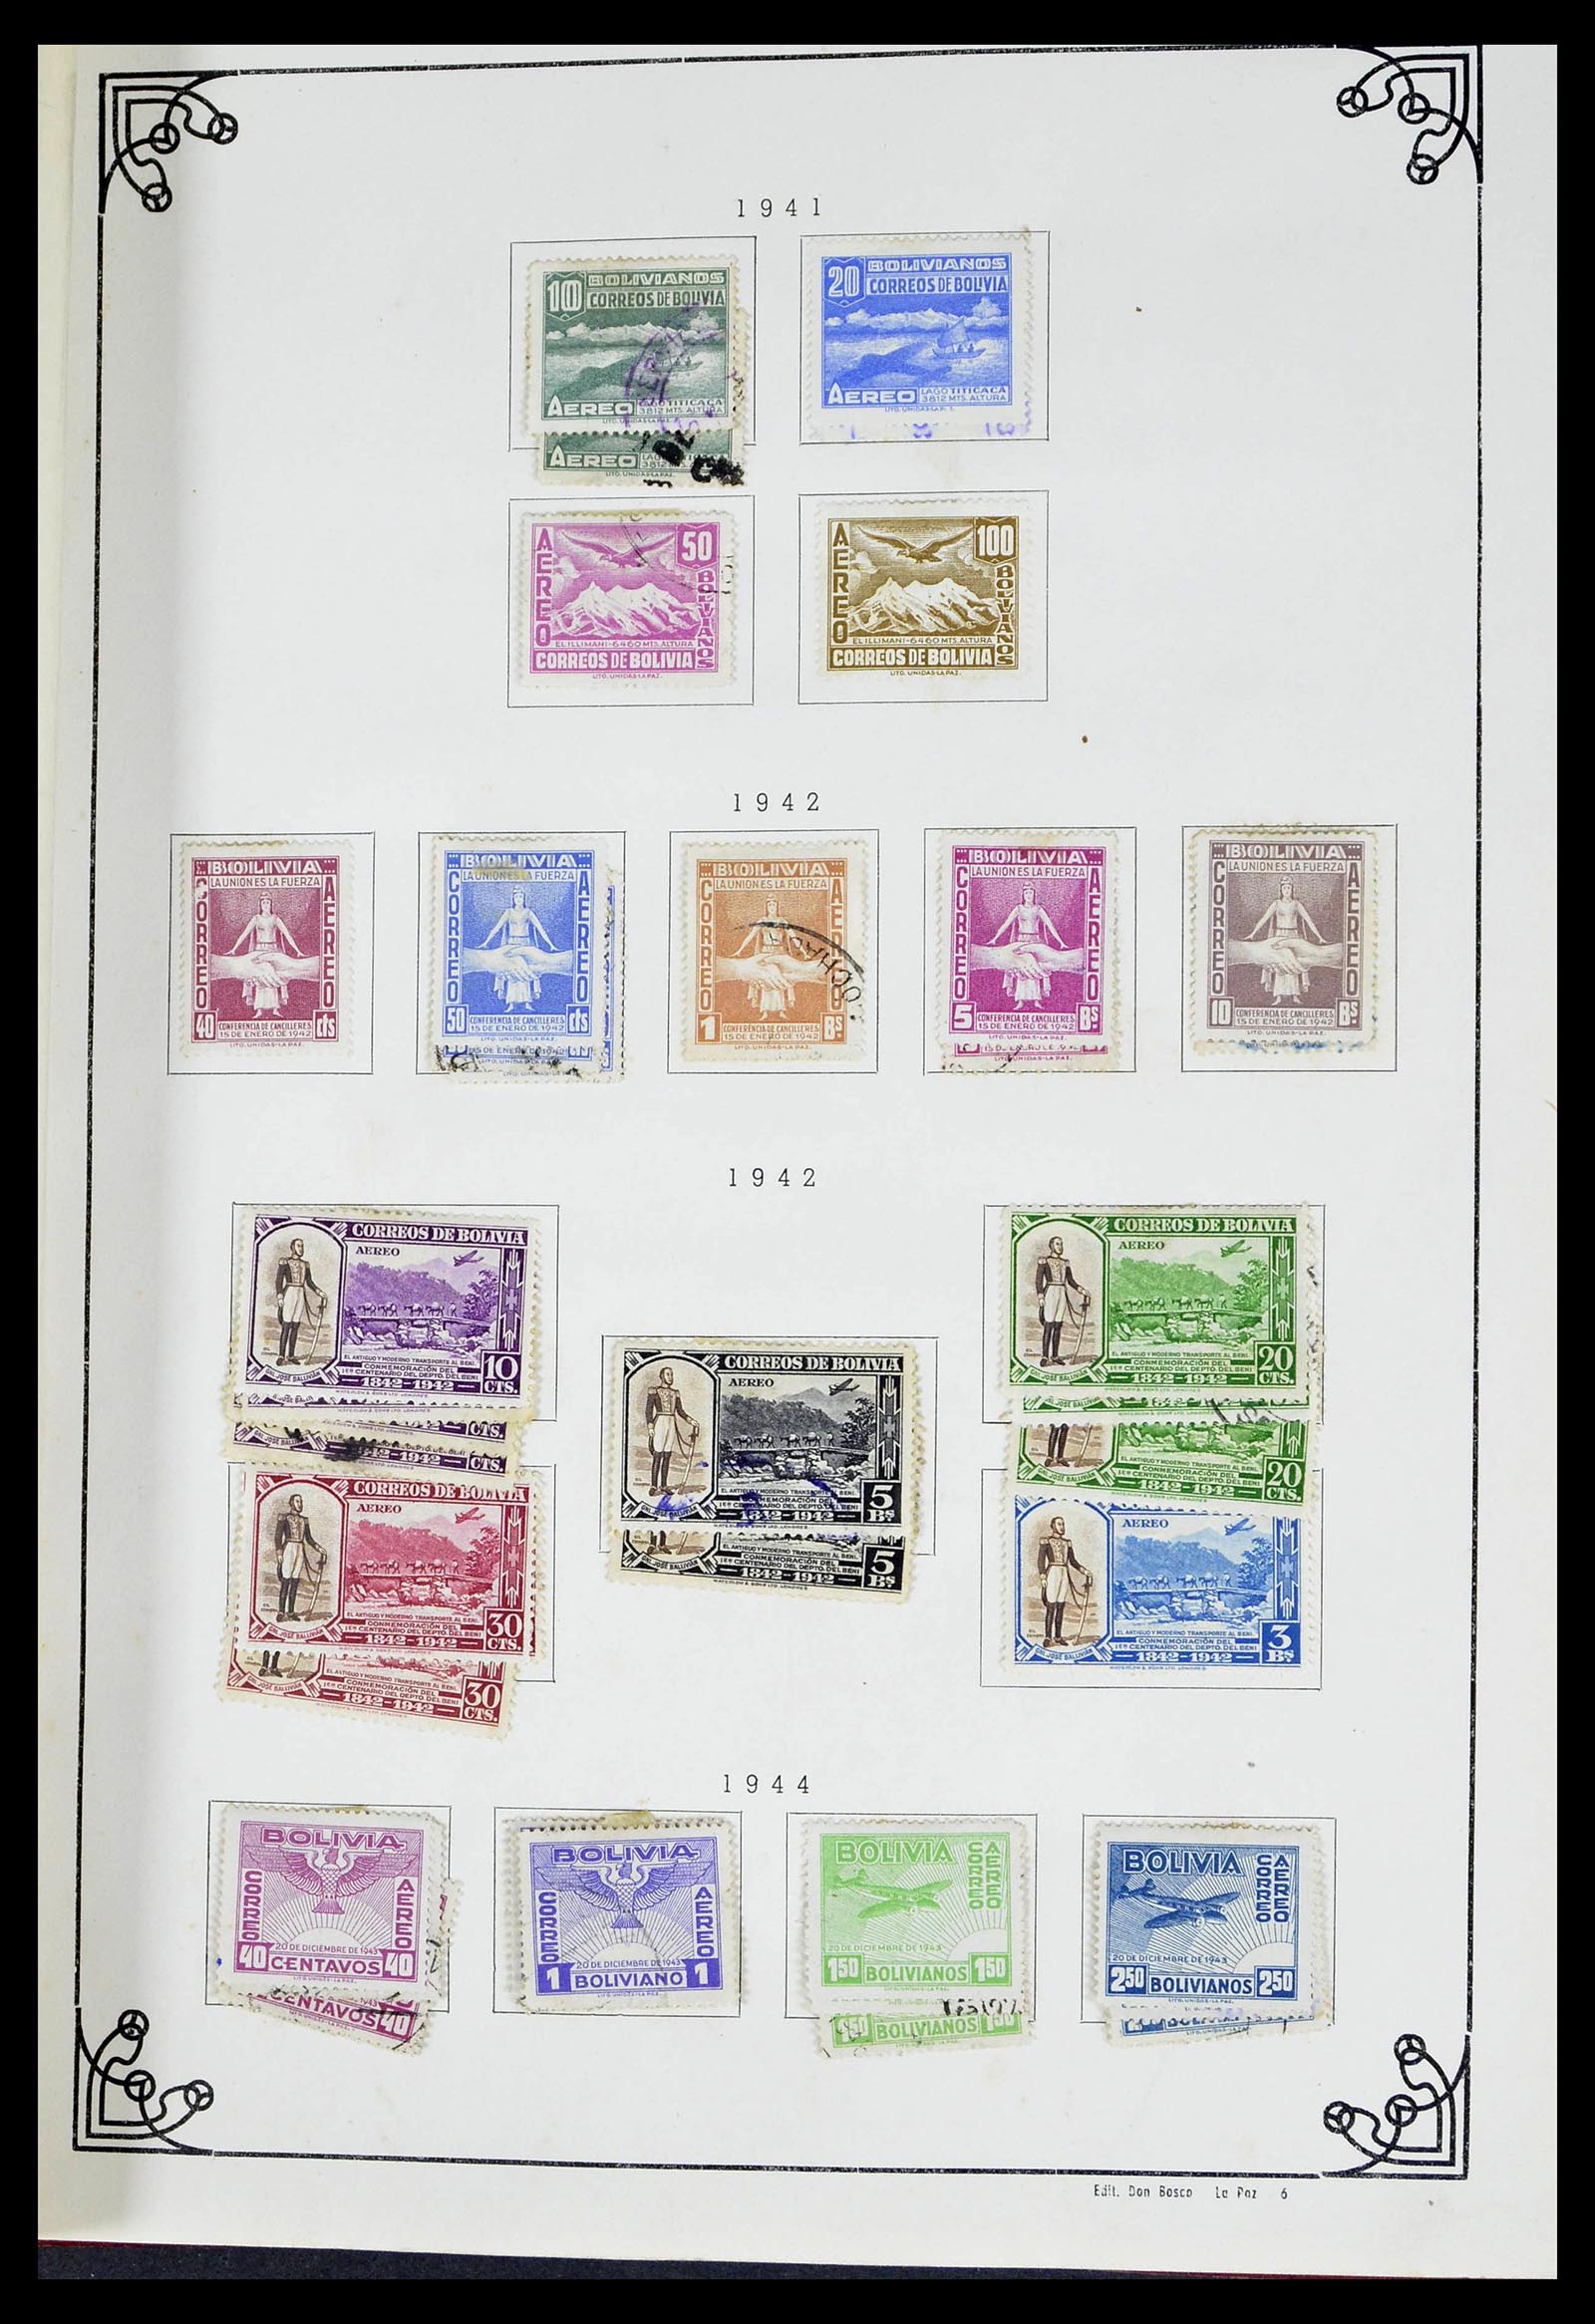 39224 0048 - Stamp collection 39224 Bolivia 1849-1955.